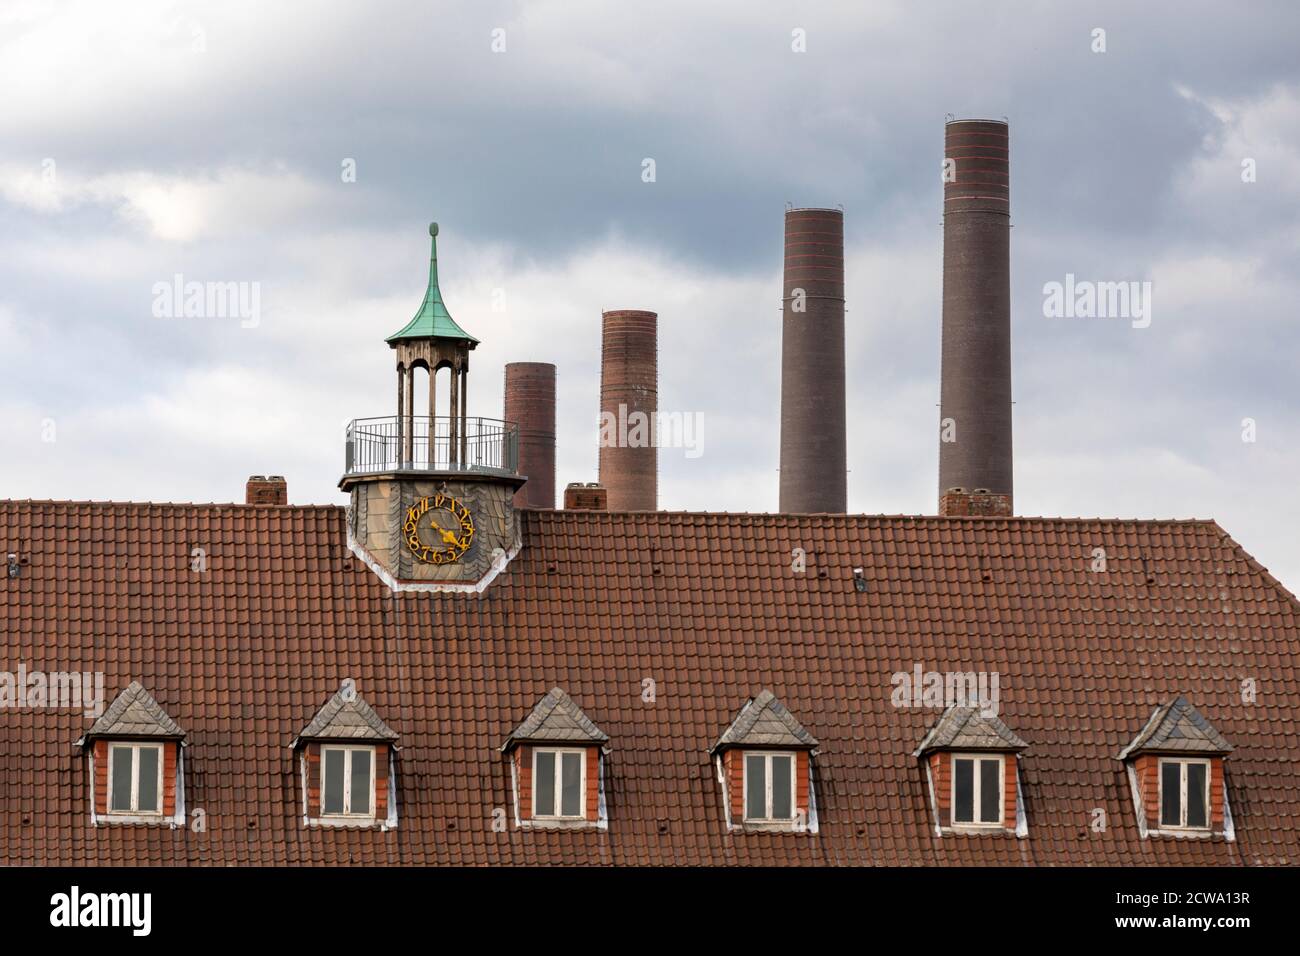 Rooftop, clock tower and car plant chimneys in Wolfsburg Stock Photo